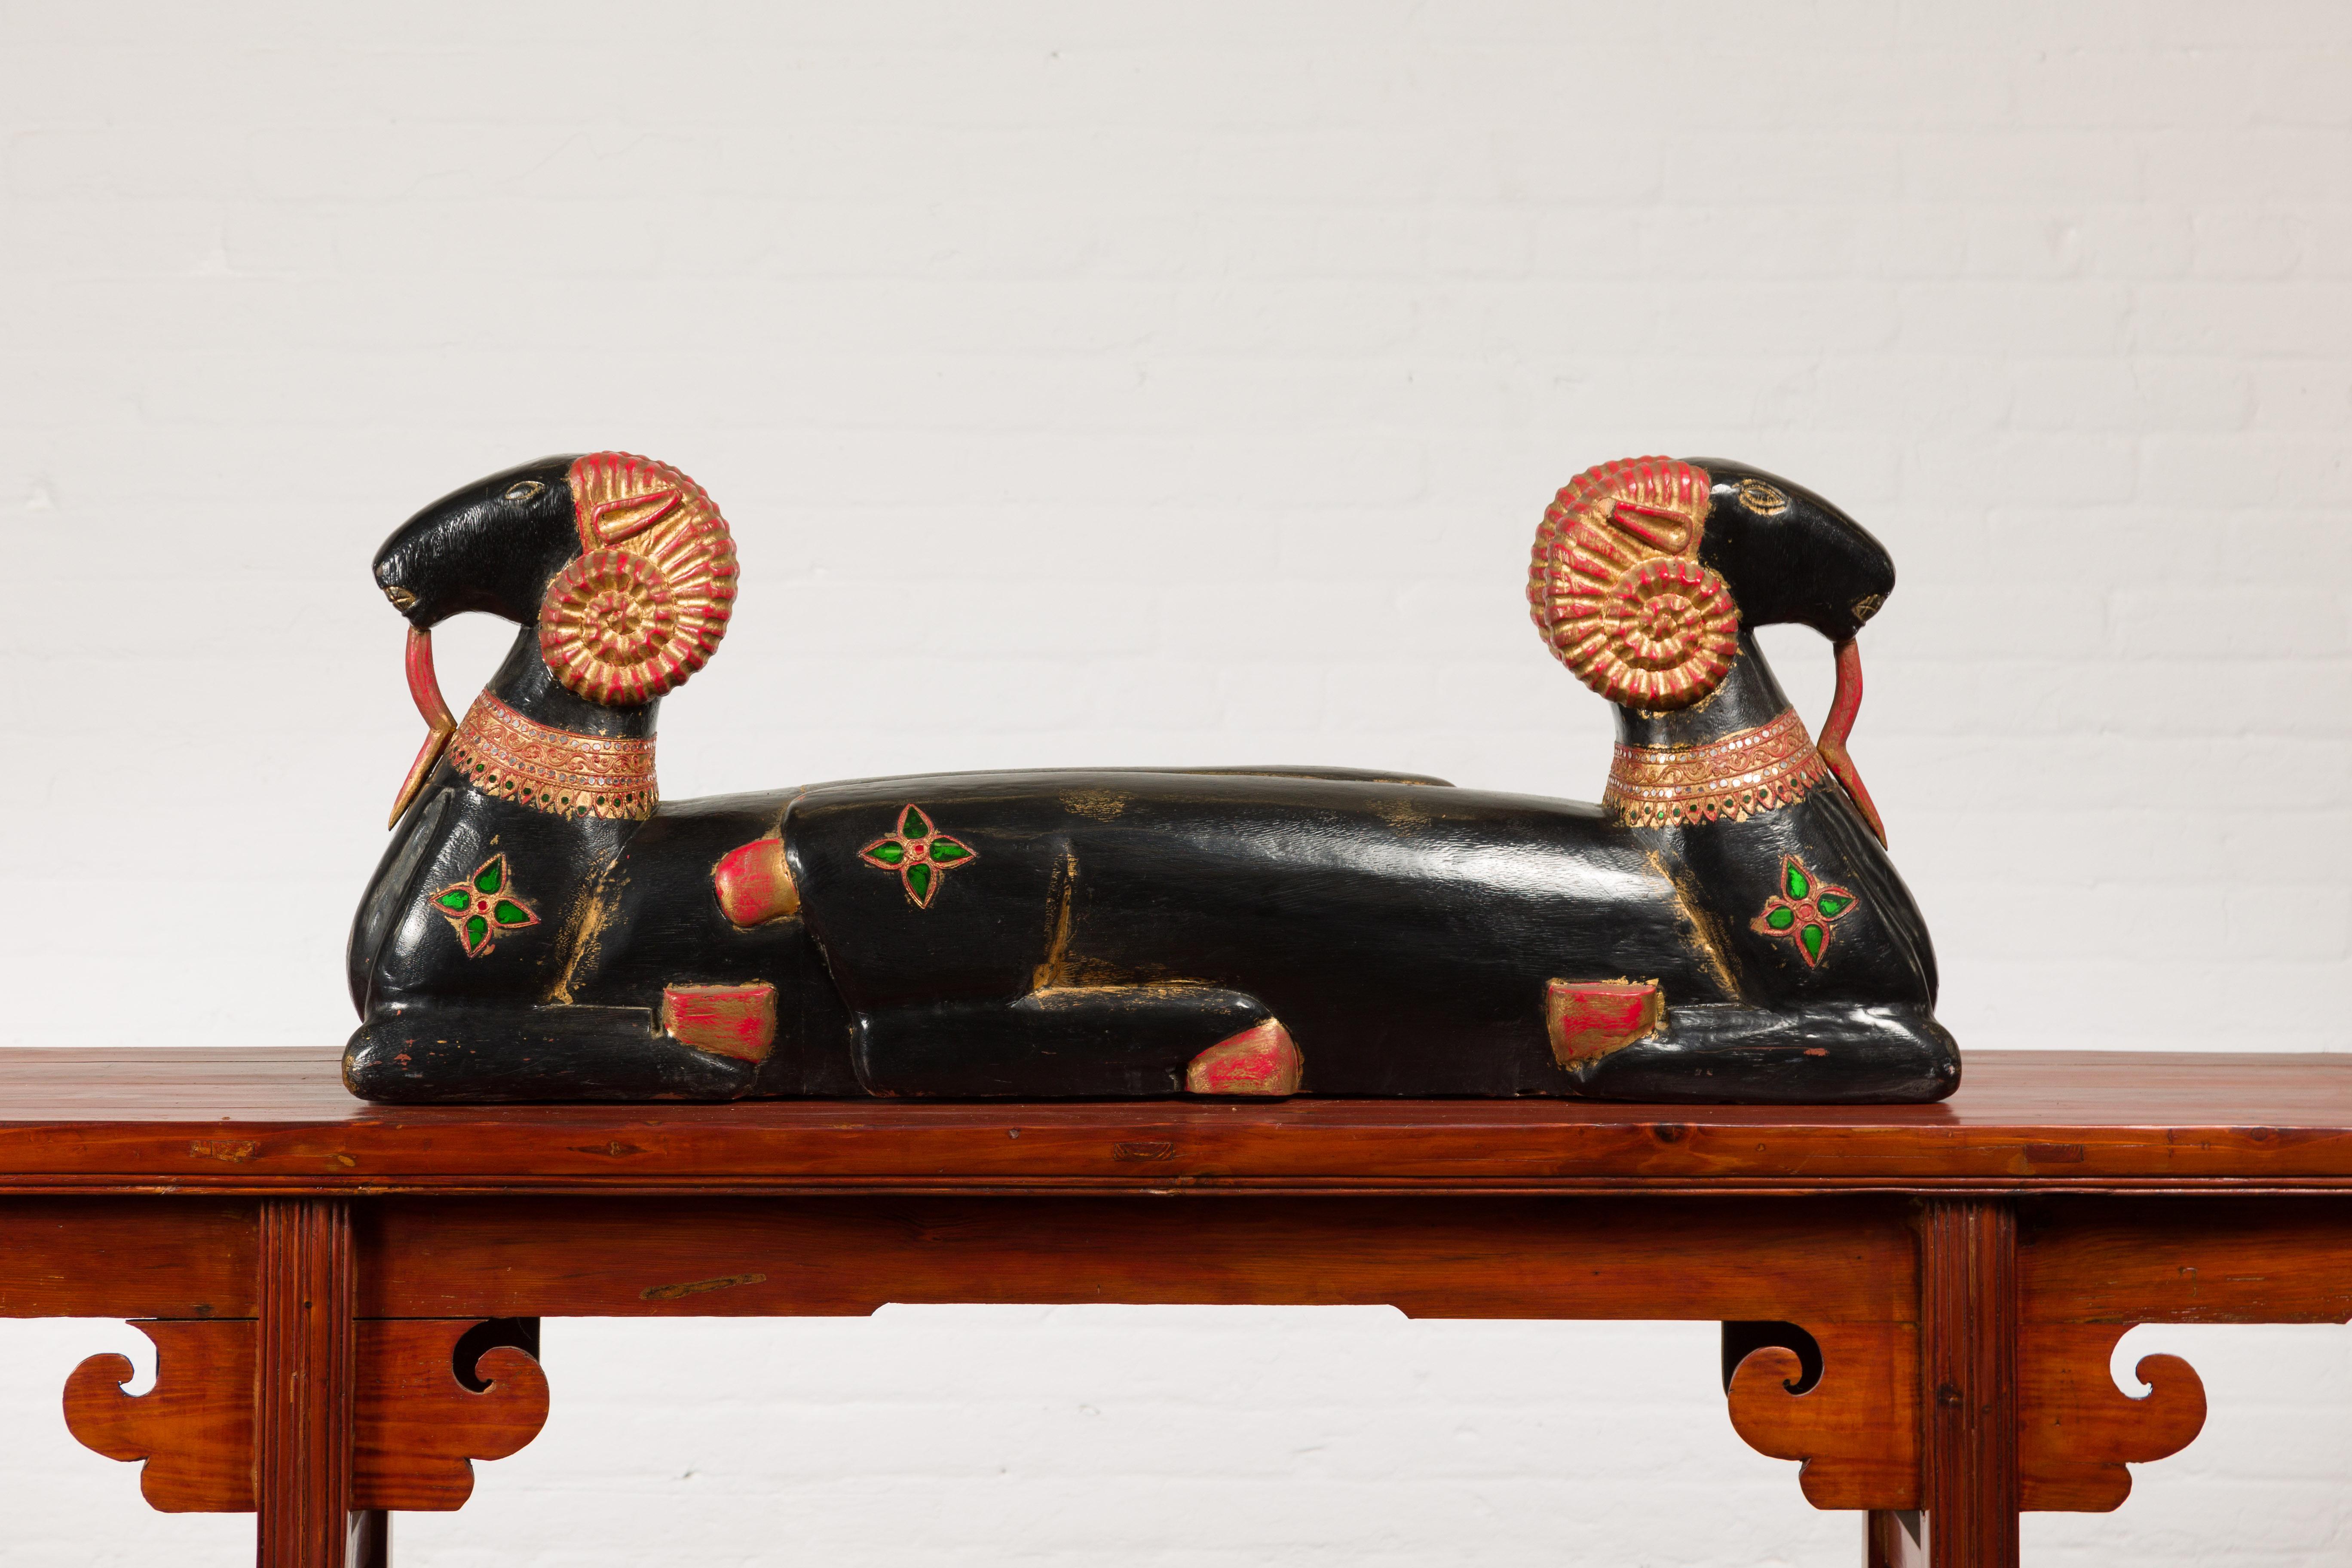 A vintage Northern Thai double ram black painted sculpture from the mid-20th century, with elegant antlers, green glass jewelry motifs and red accents. Found in Northern Thailand, this horizontal sculpture from the Midcentury period features two